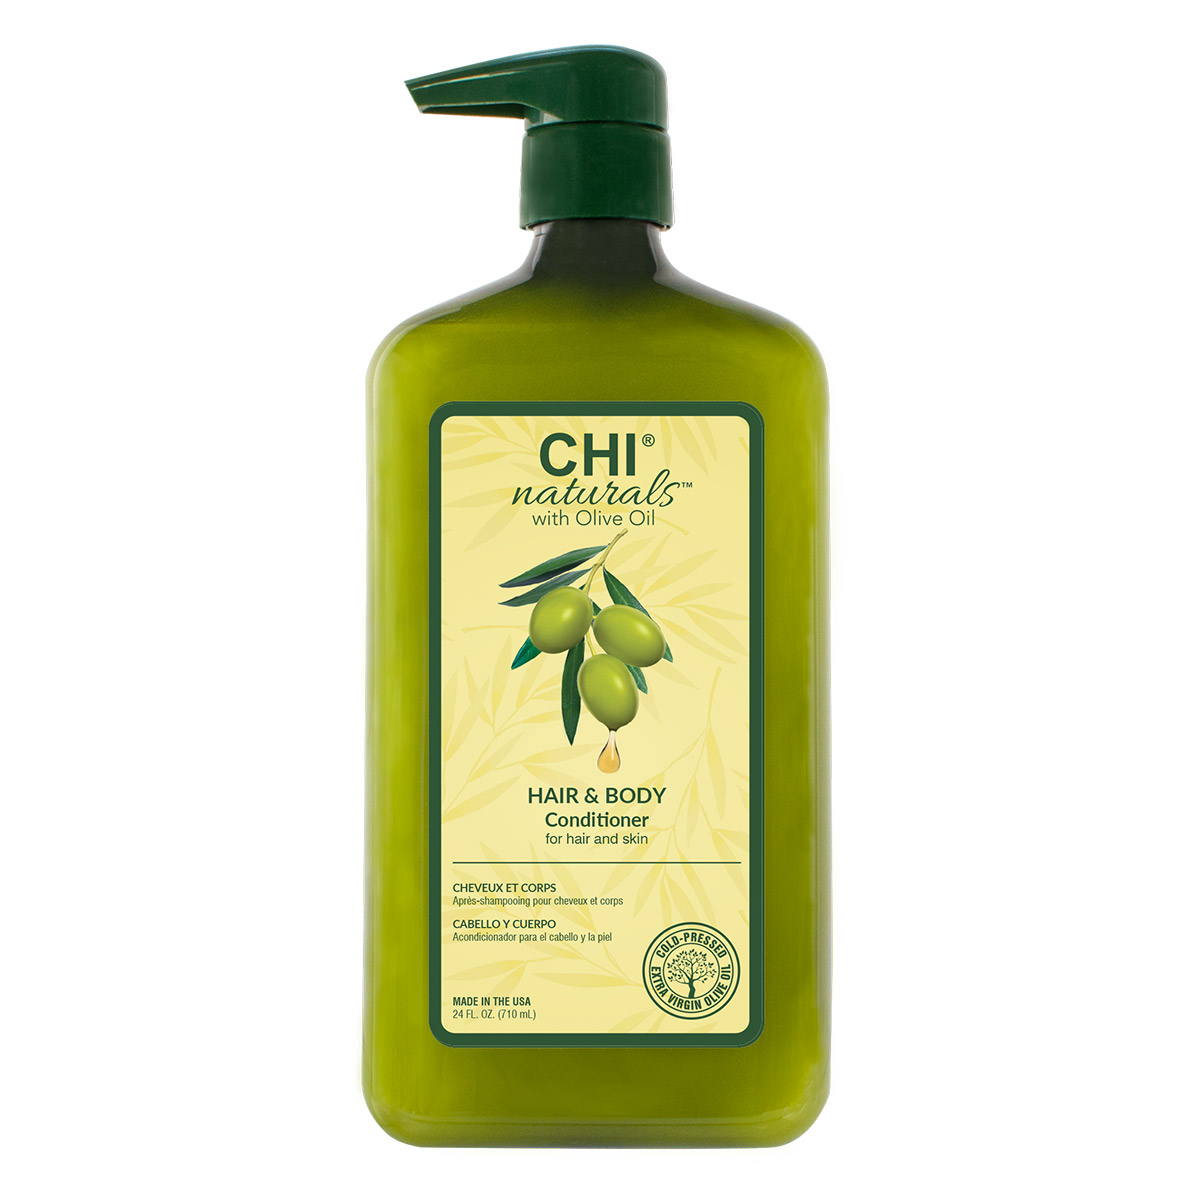 CHI Natural Organics Oil - Hair & Body Conditionner - 340 ml - Olive bio Nutrition intense